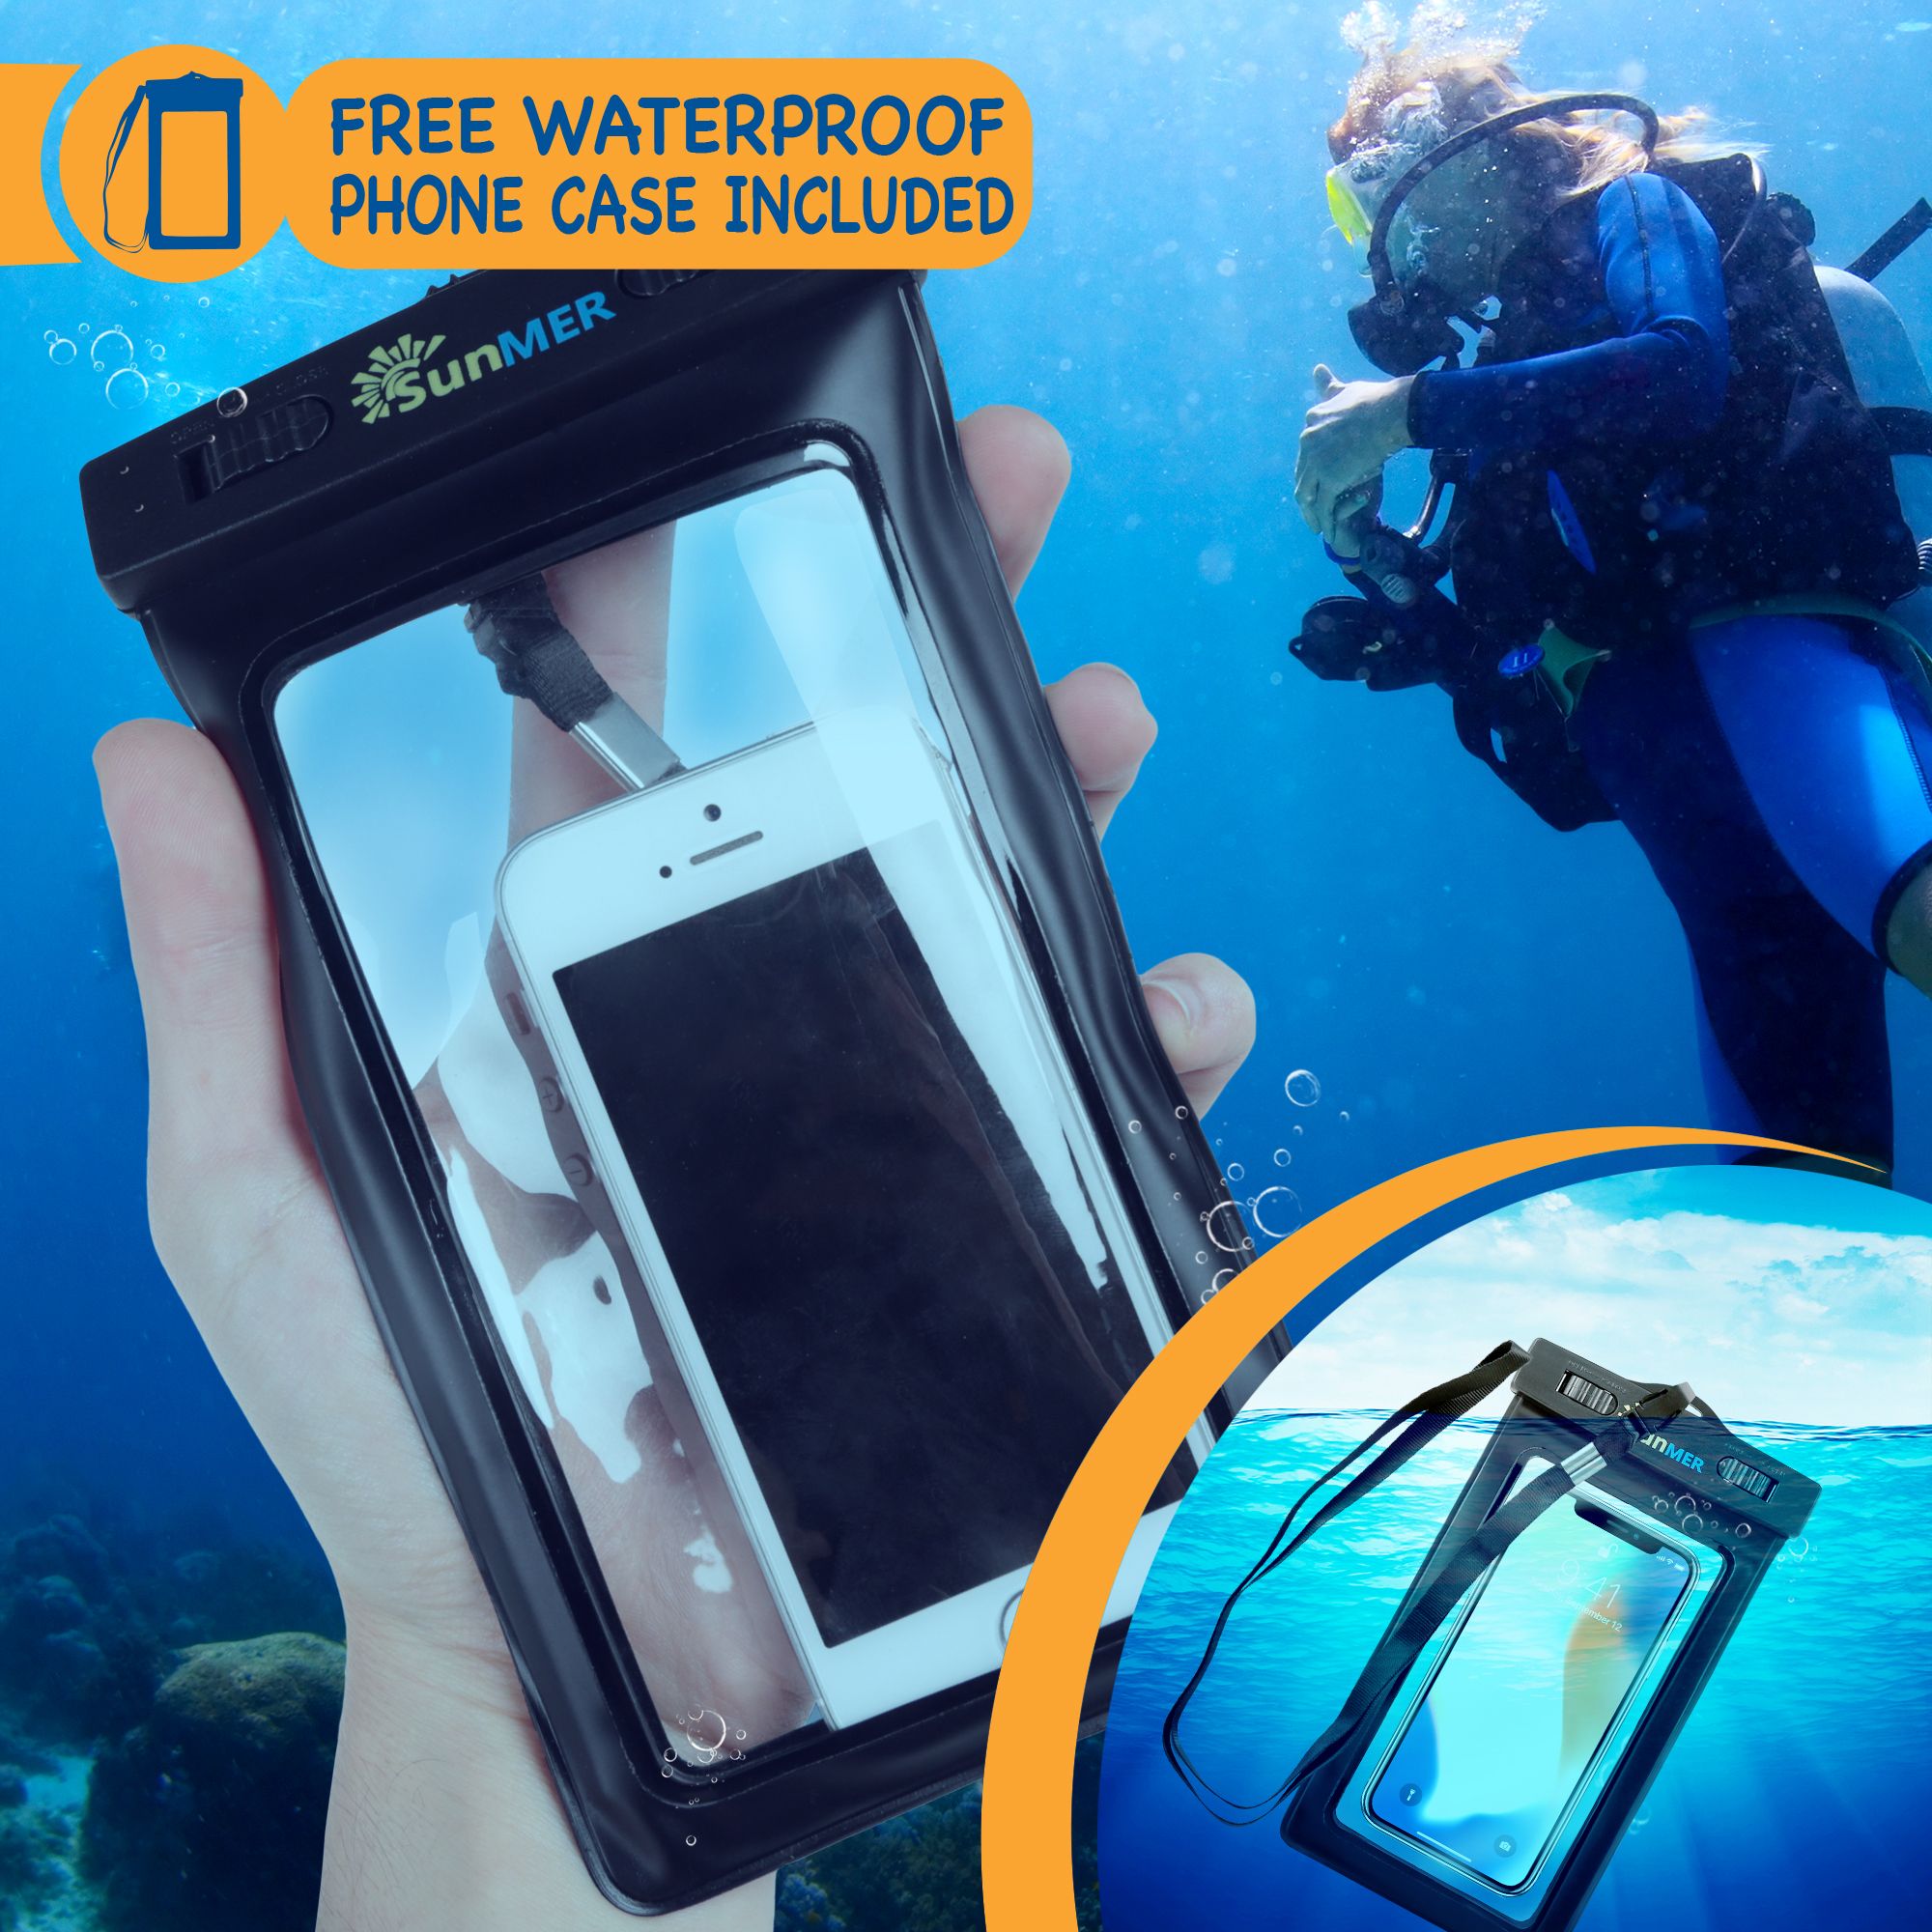 SUNMER 20L Dry Bag With Waterproof Phone Case - Blue